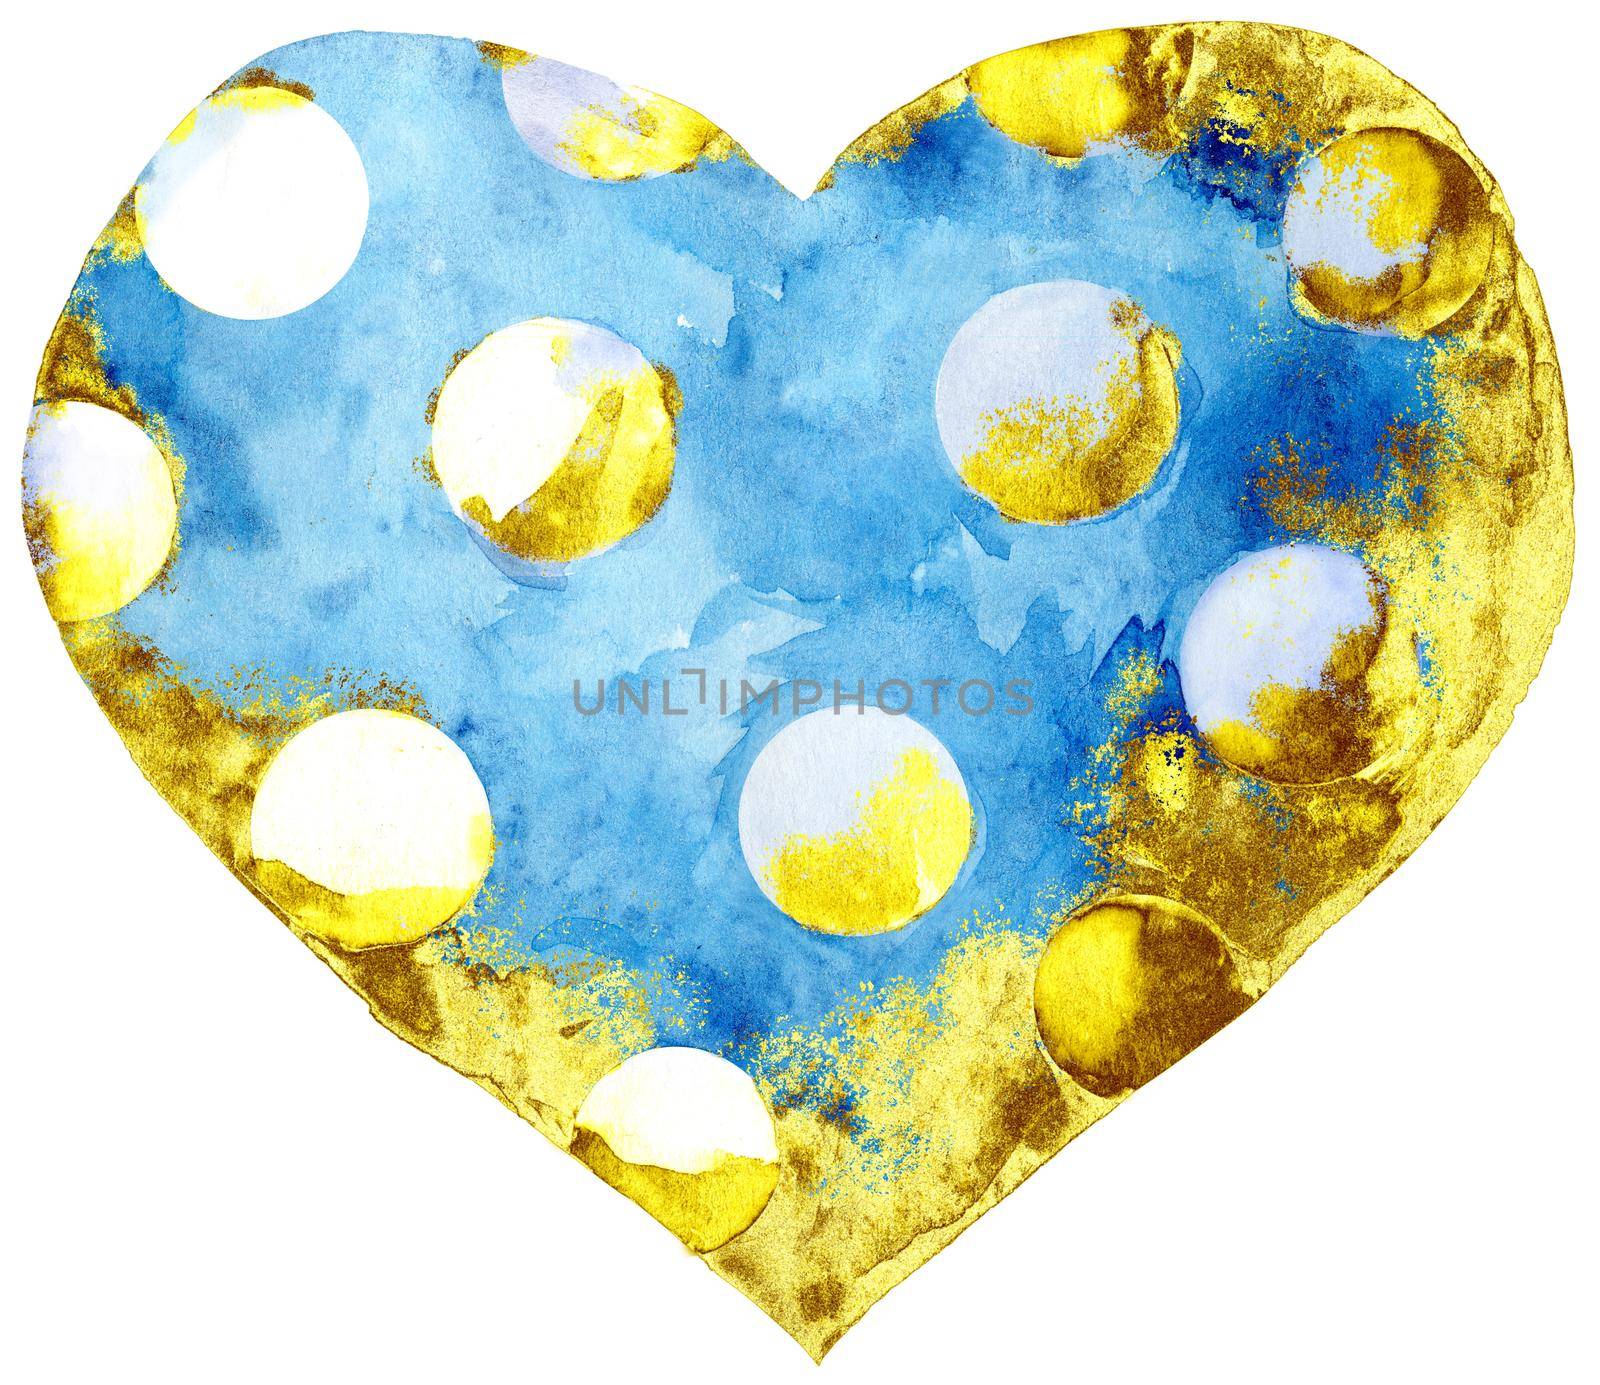 Watercolor blue heart with white dots and gold strokes by NataOmsk